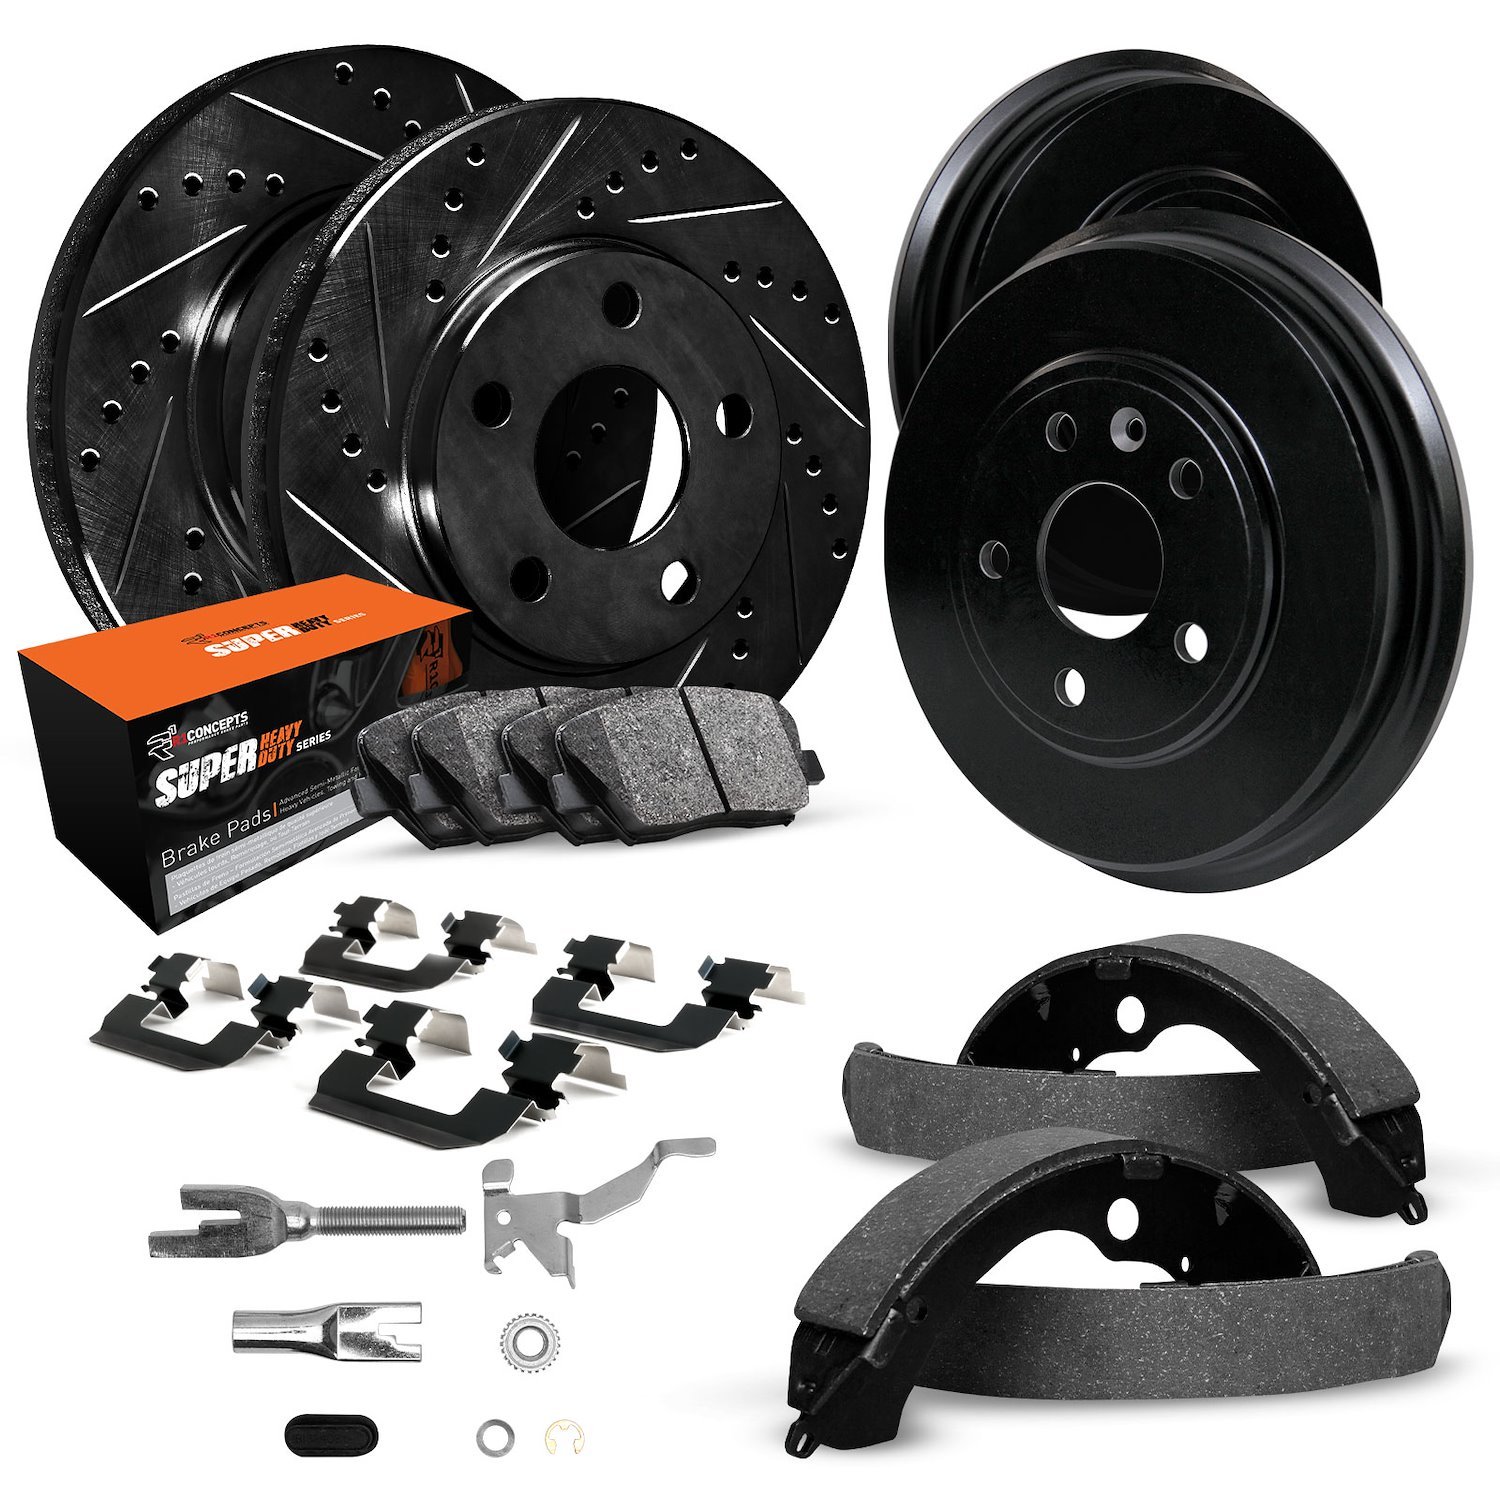 E-Line Slotted Black Brake Rotor & Drum Set w/Super-Duty Pads, Shoes, Hardware/Adjusters, 1995-1996 Ford/Lincoln/Mercury/Mazda